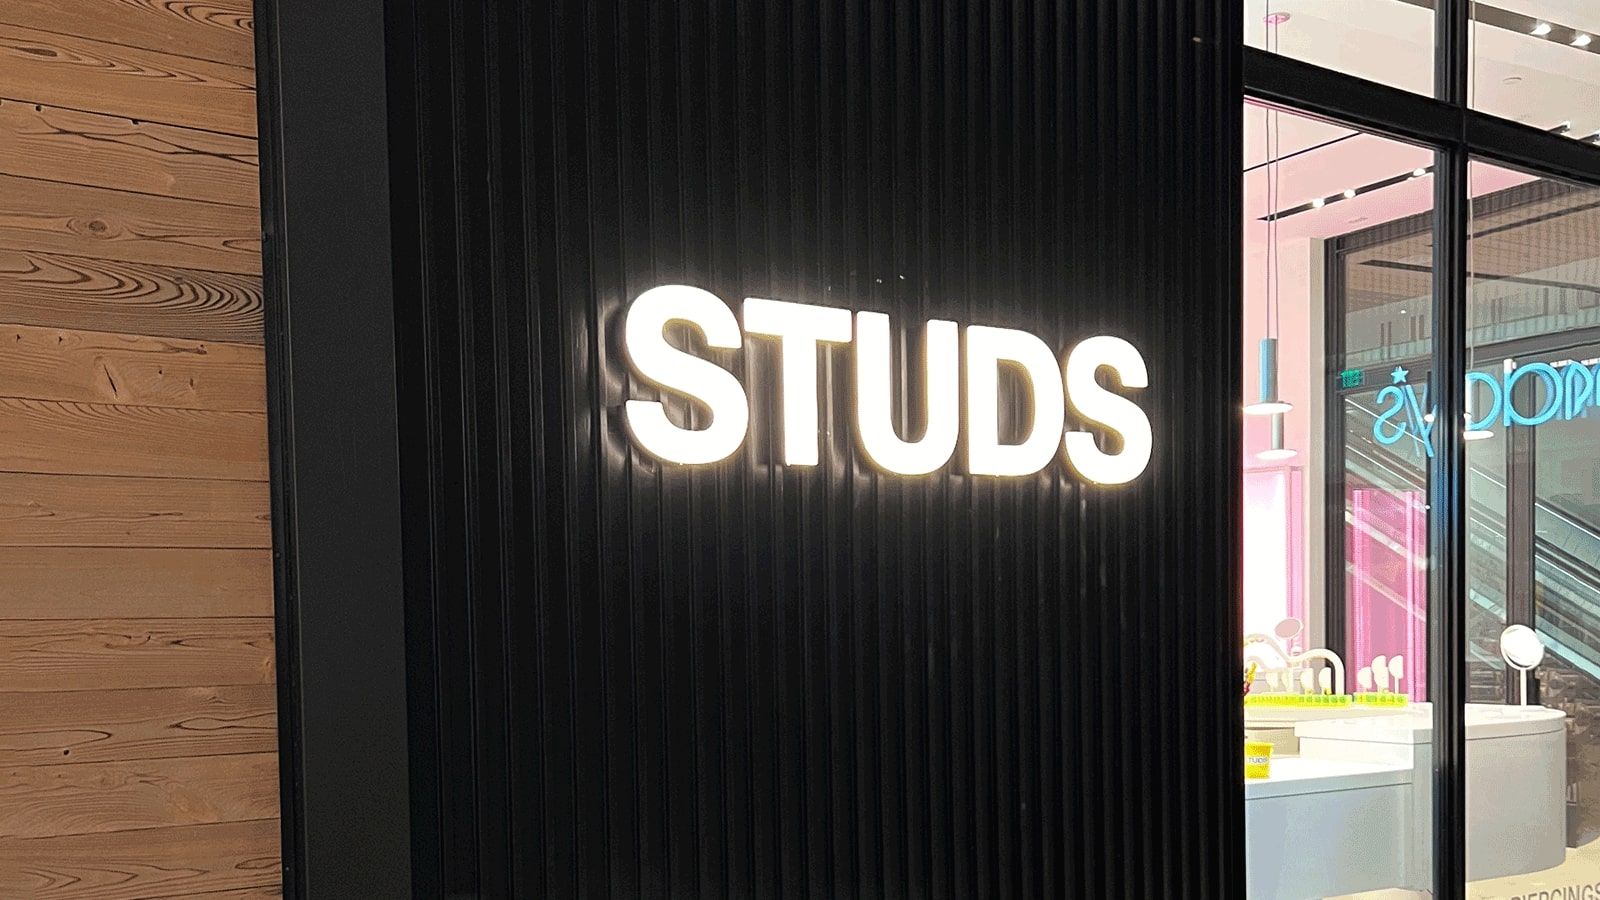 STUDS store sign installed on the wall